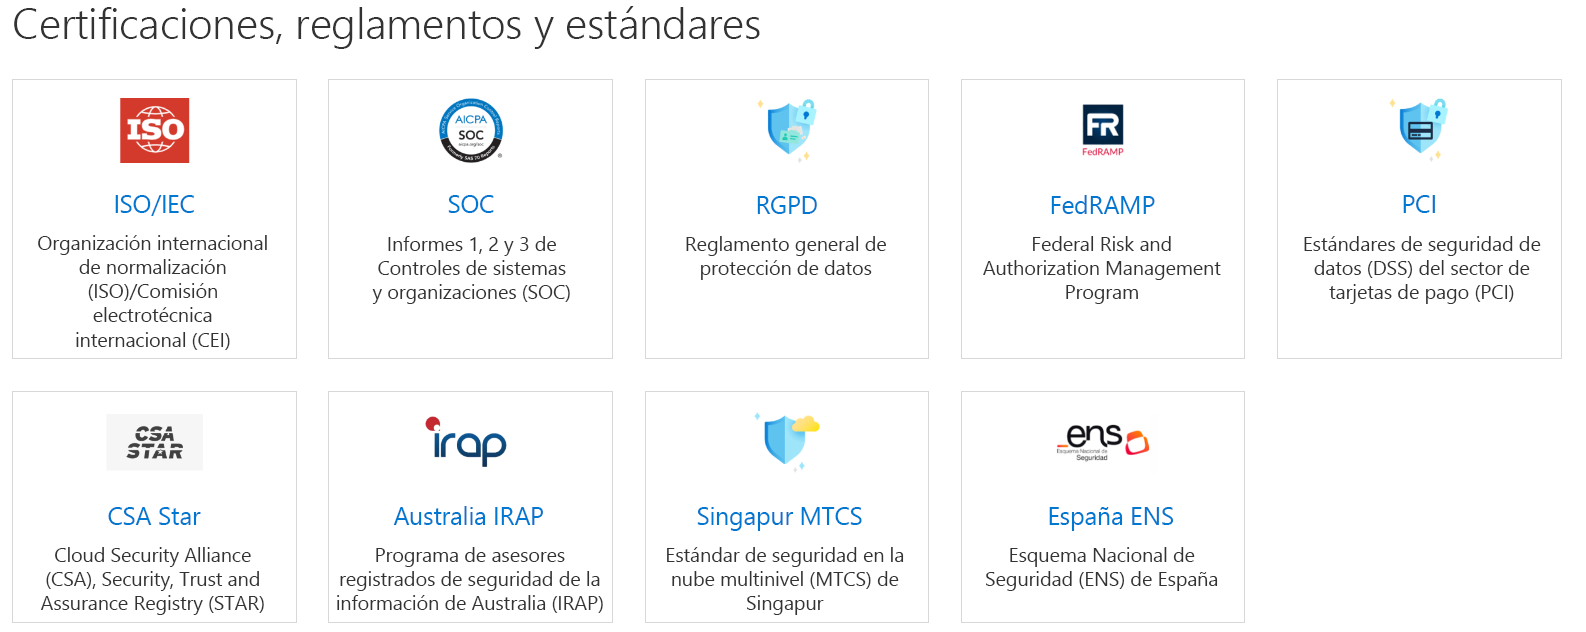 Screenshot of the tiles available in the certifications, regulations, and standards section of the Service Trust Portal home page.